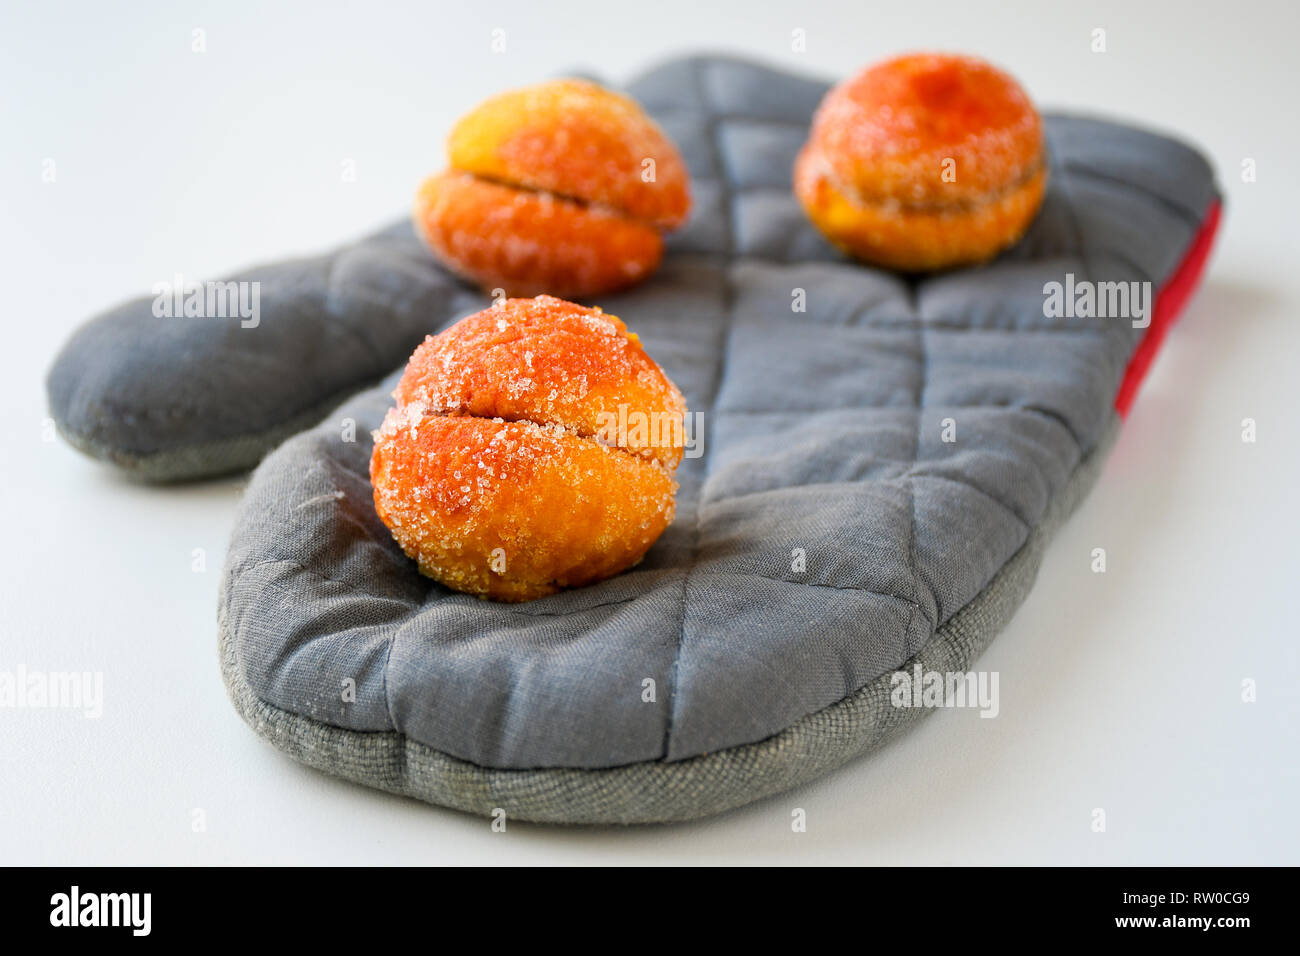 Freshly made sweet apricots with sugar coating sitting on a grey baking glove Stock Photo